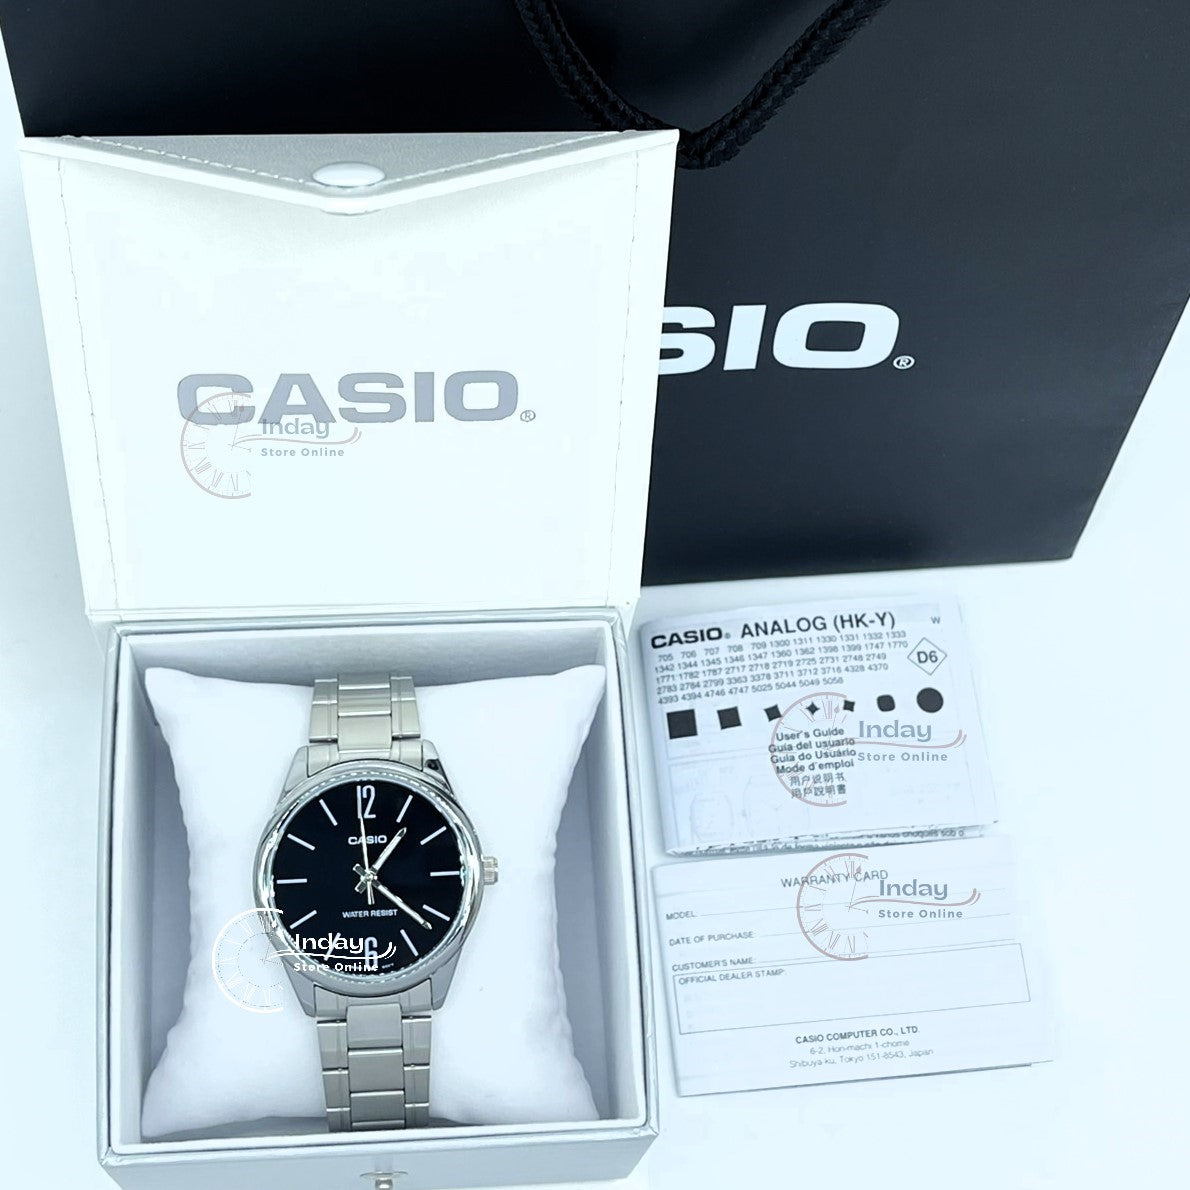 Casio Standard Men's Watch MTP-V005D-1B Silver Plated Stainless Steel Mineral Glass